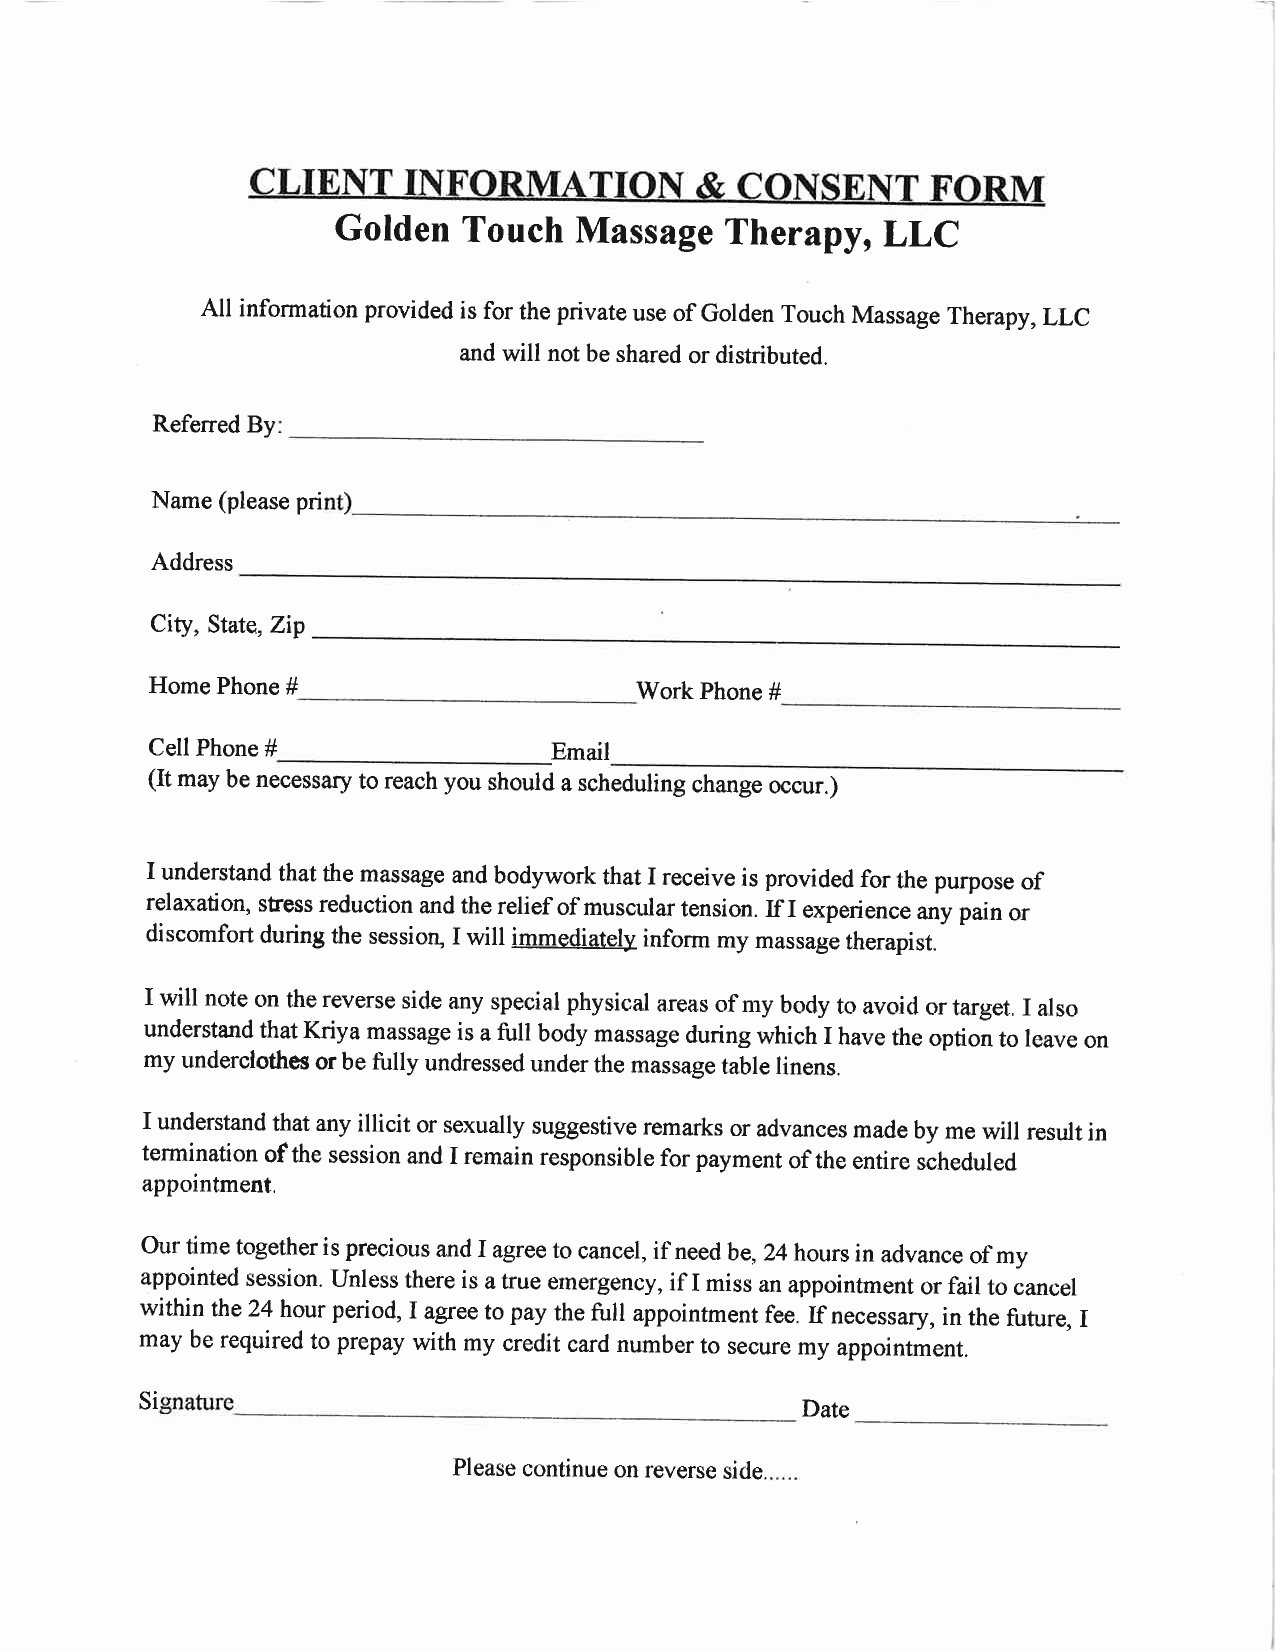 Simple Massage Intake form Fresh Golden touch Massage therapy Client Intake form